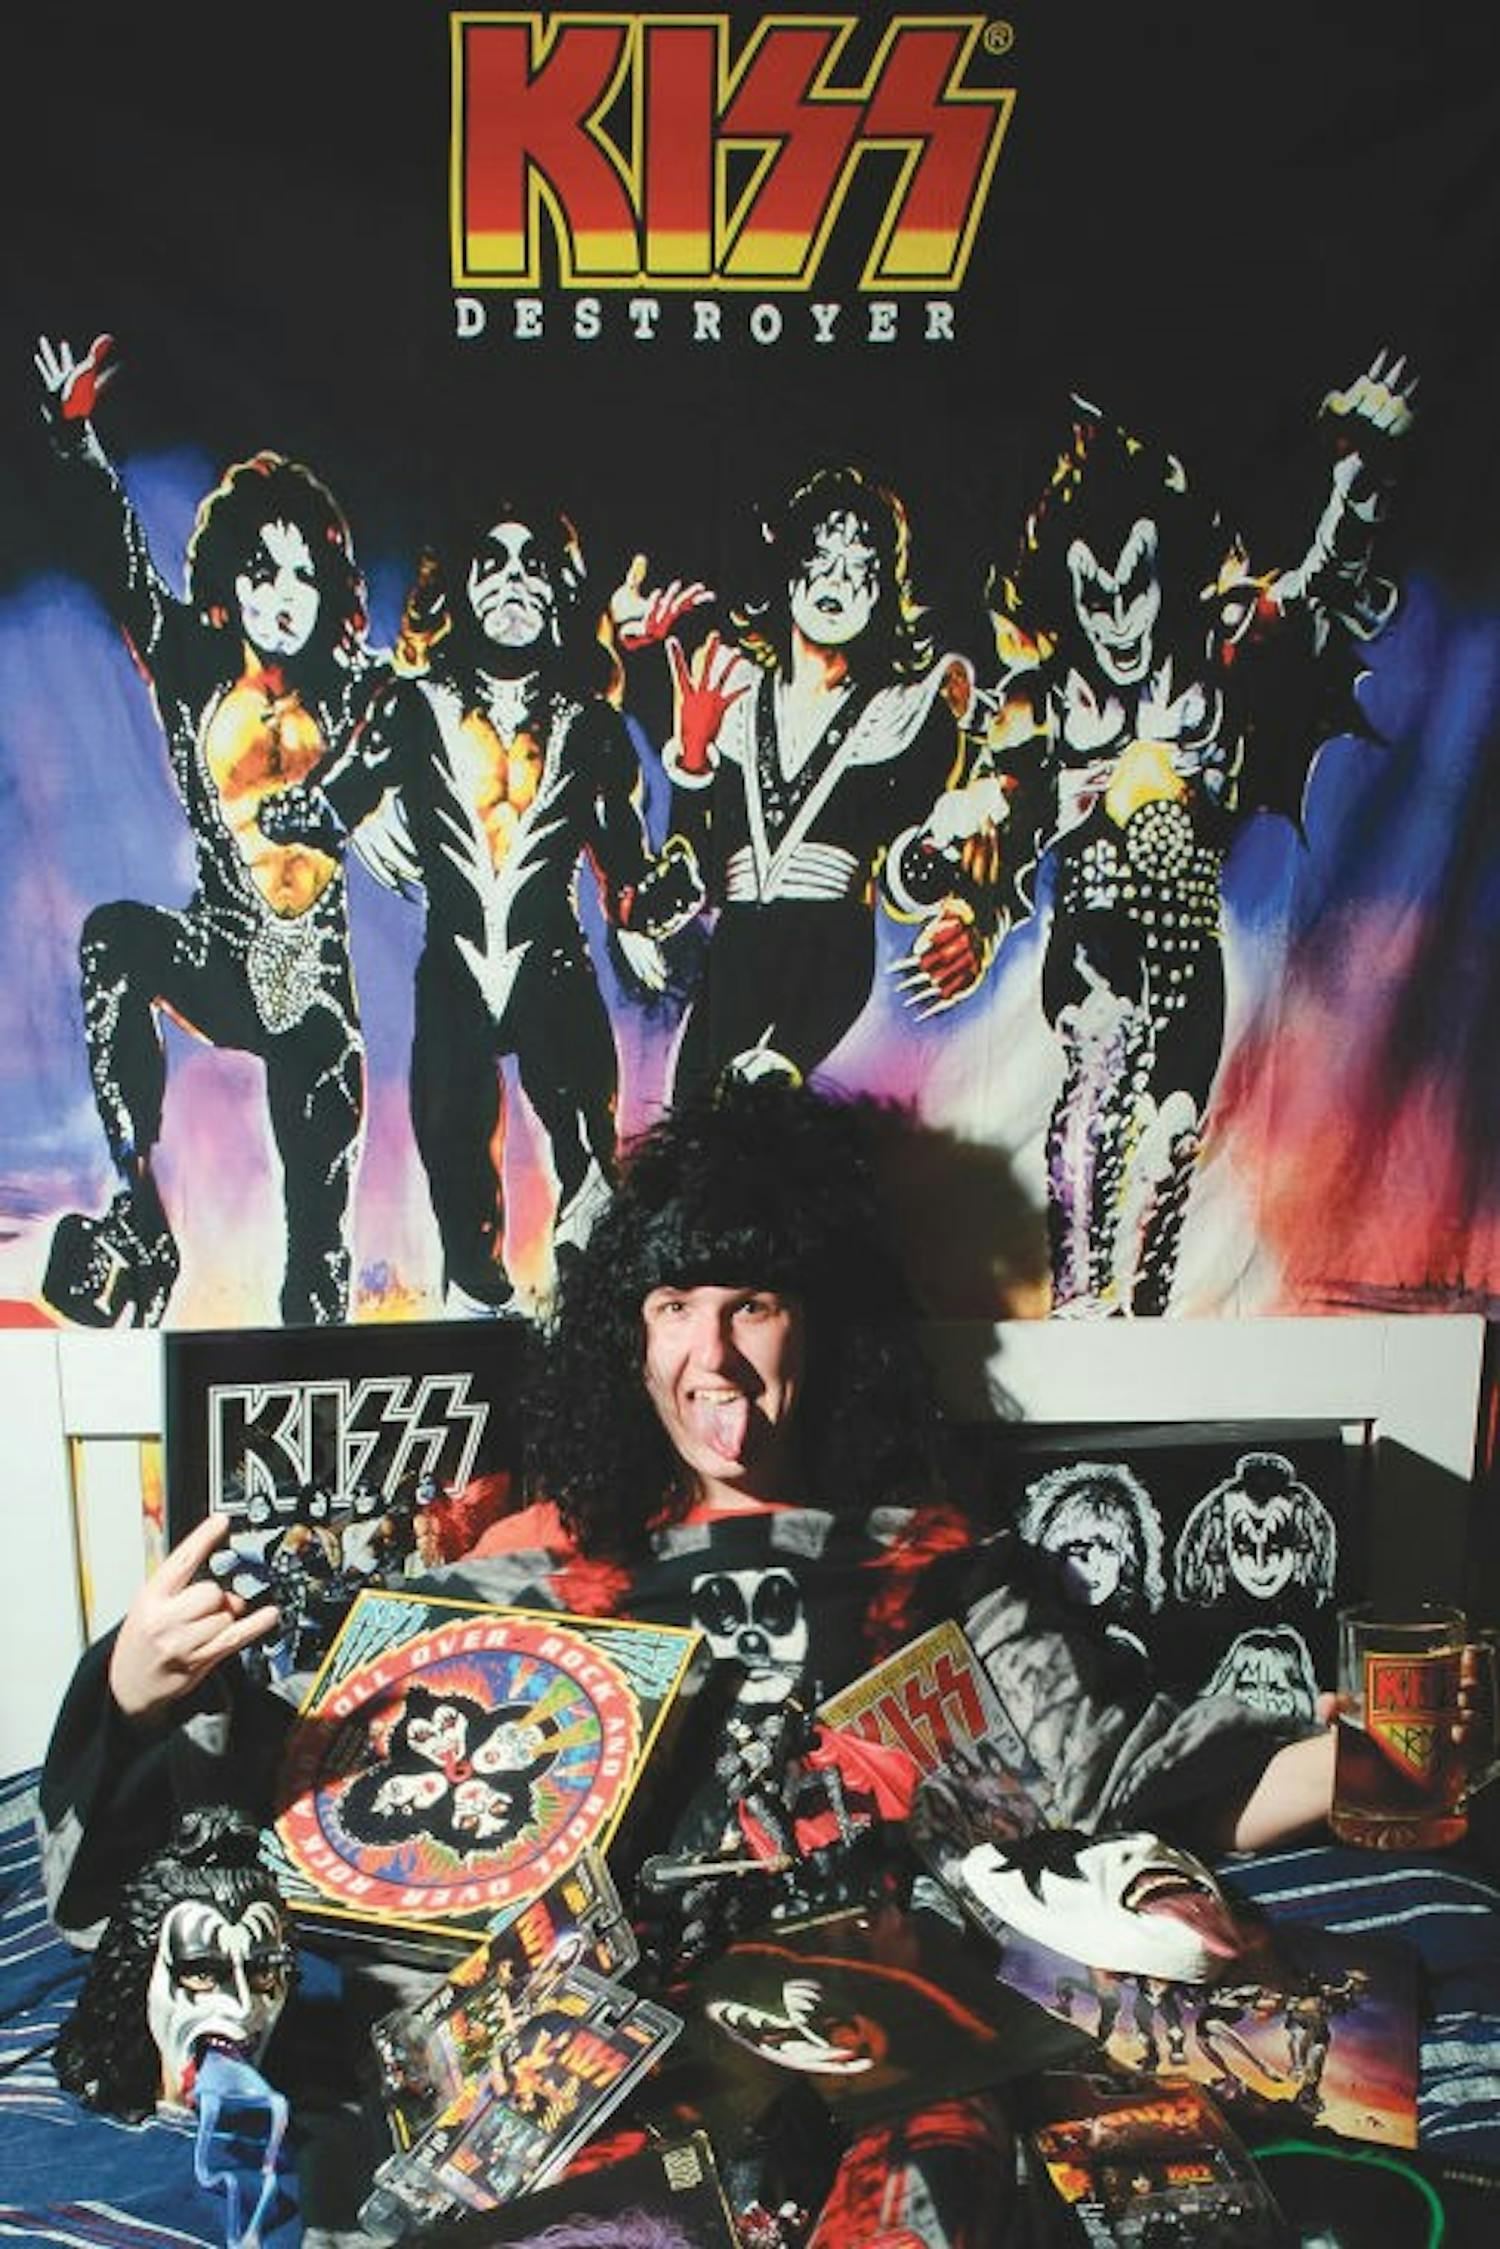 KISS collector rocks and rolls all night  